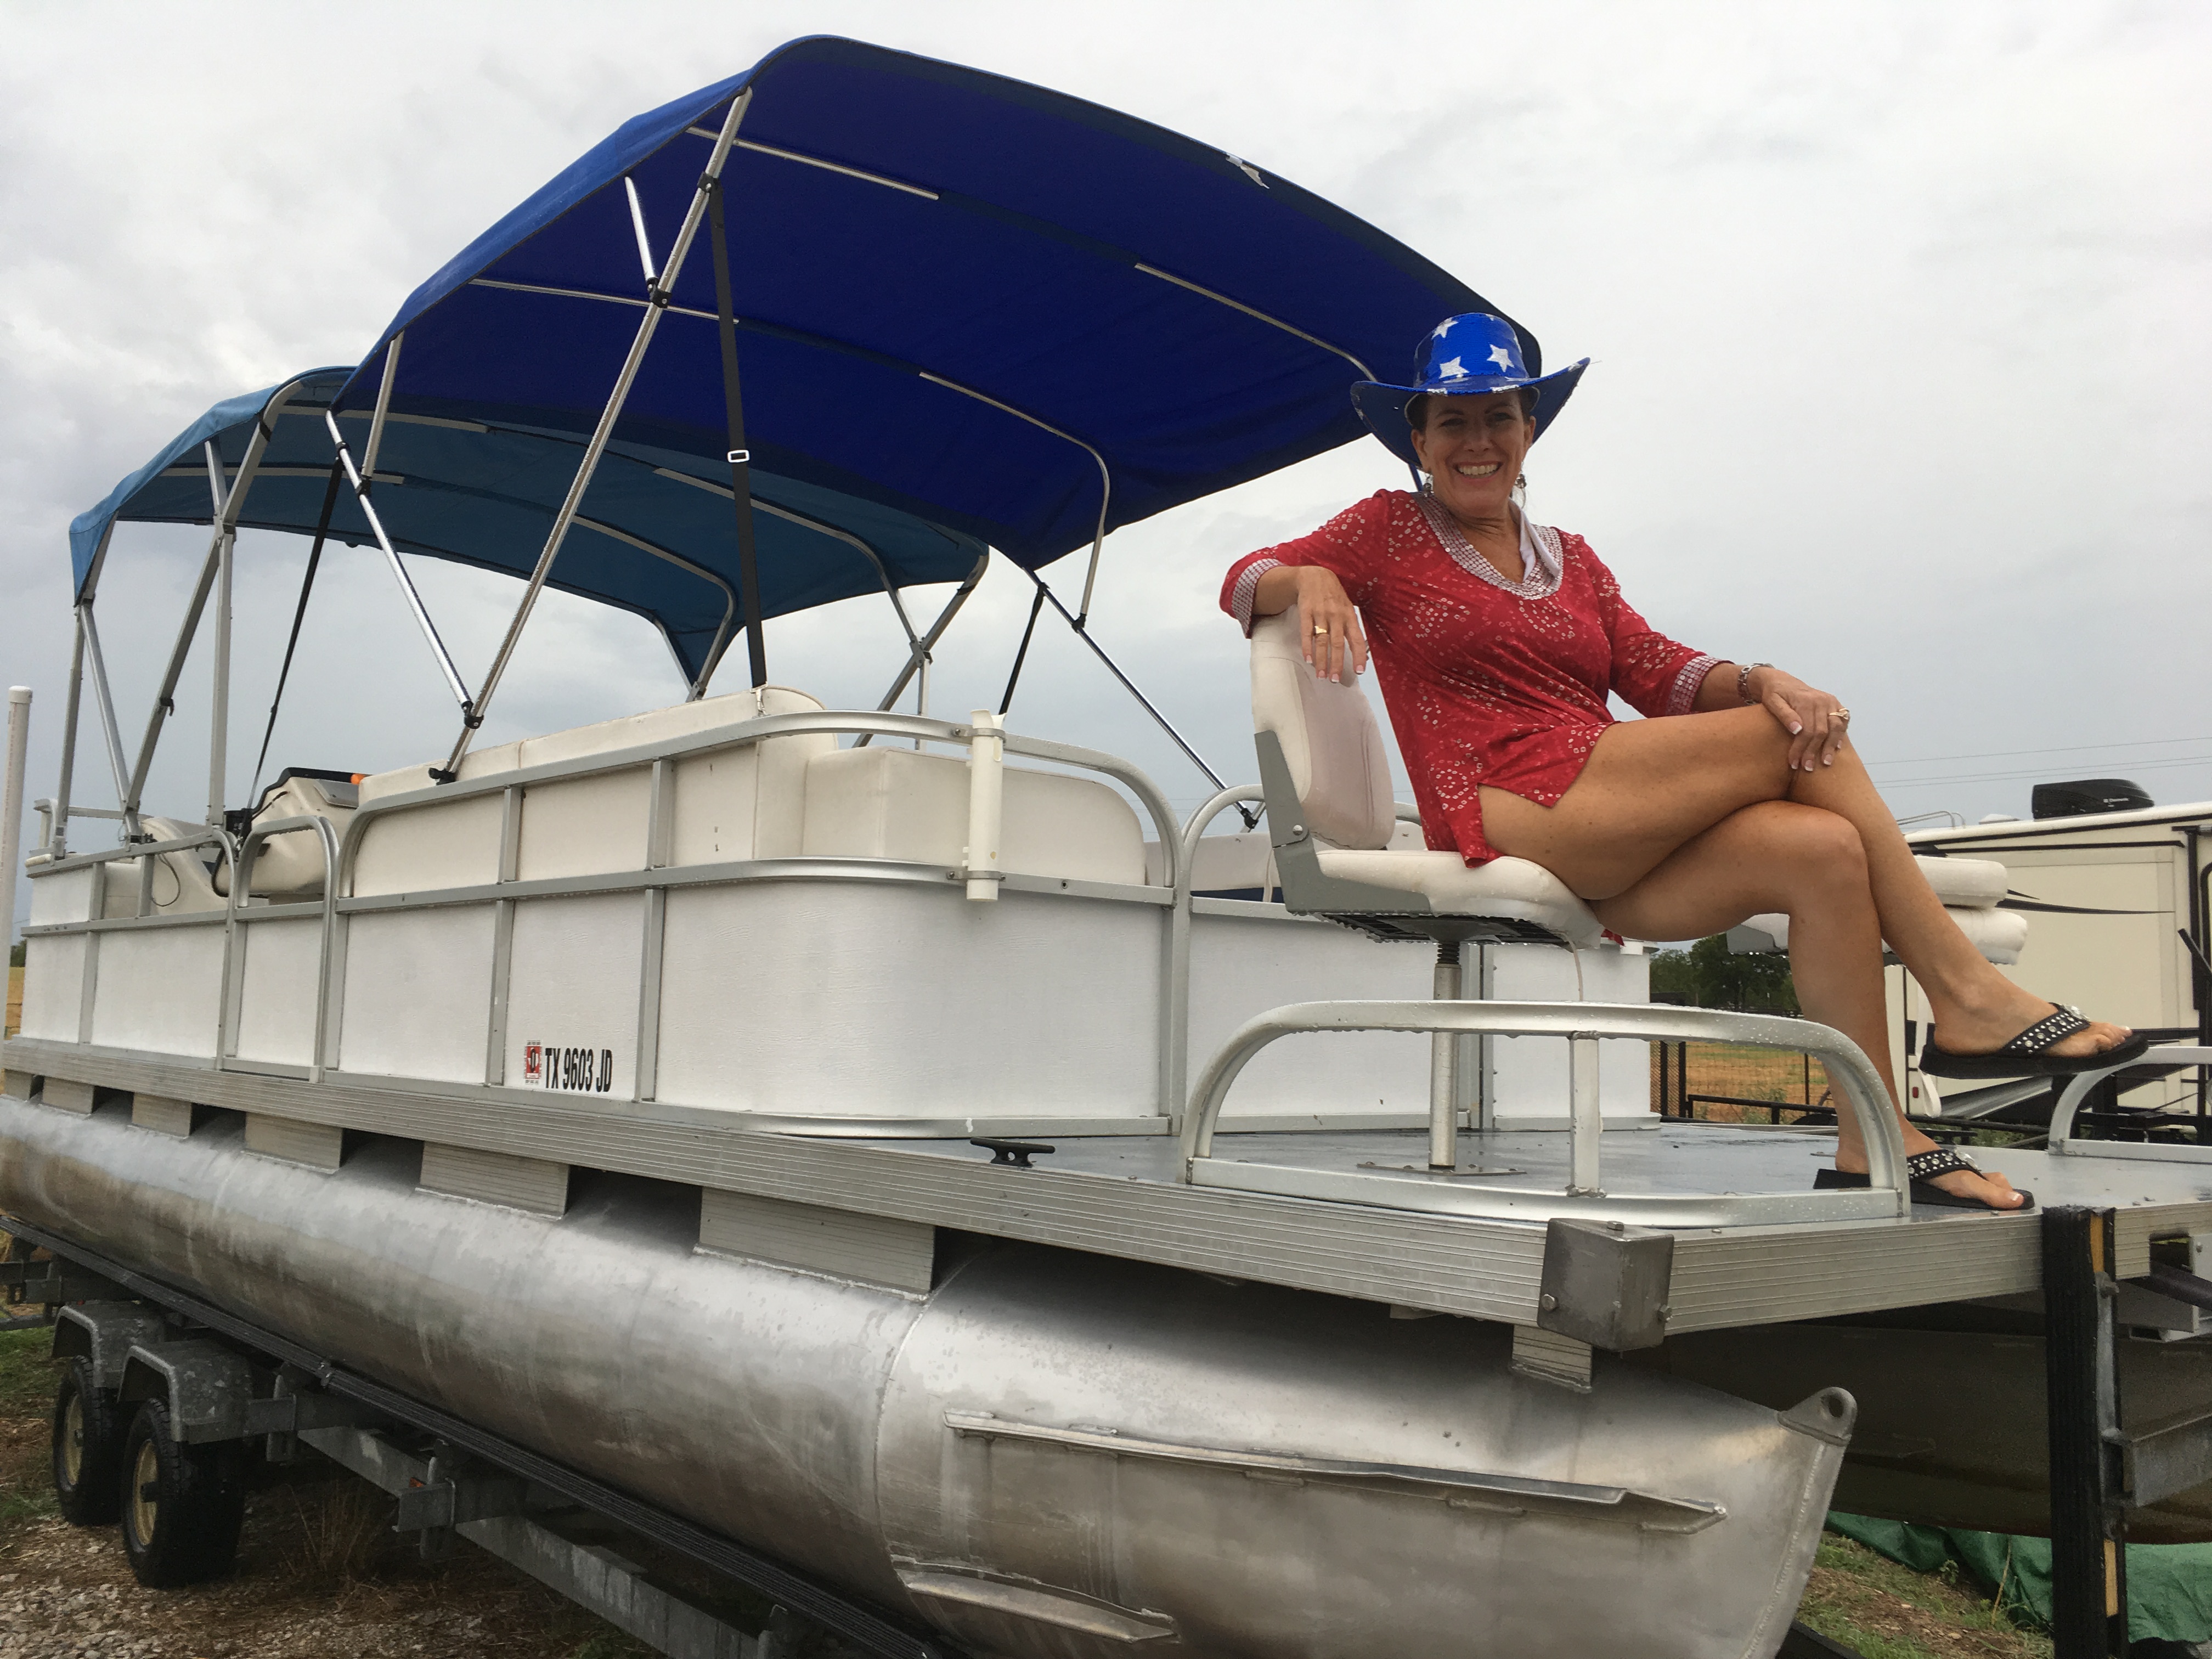 1999 24 foot Other Beachcomber Power boat for sale in Briarcliff, TX - image 1 